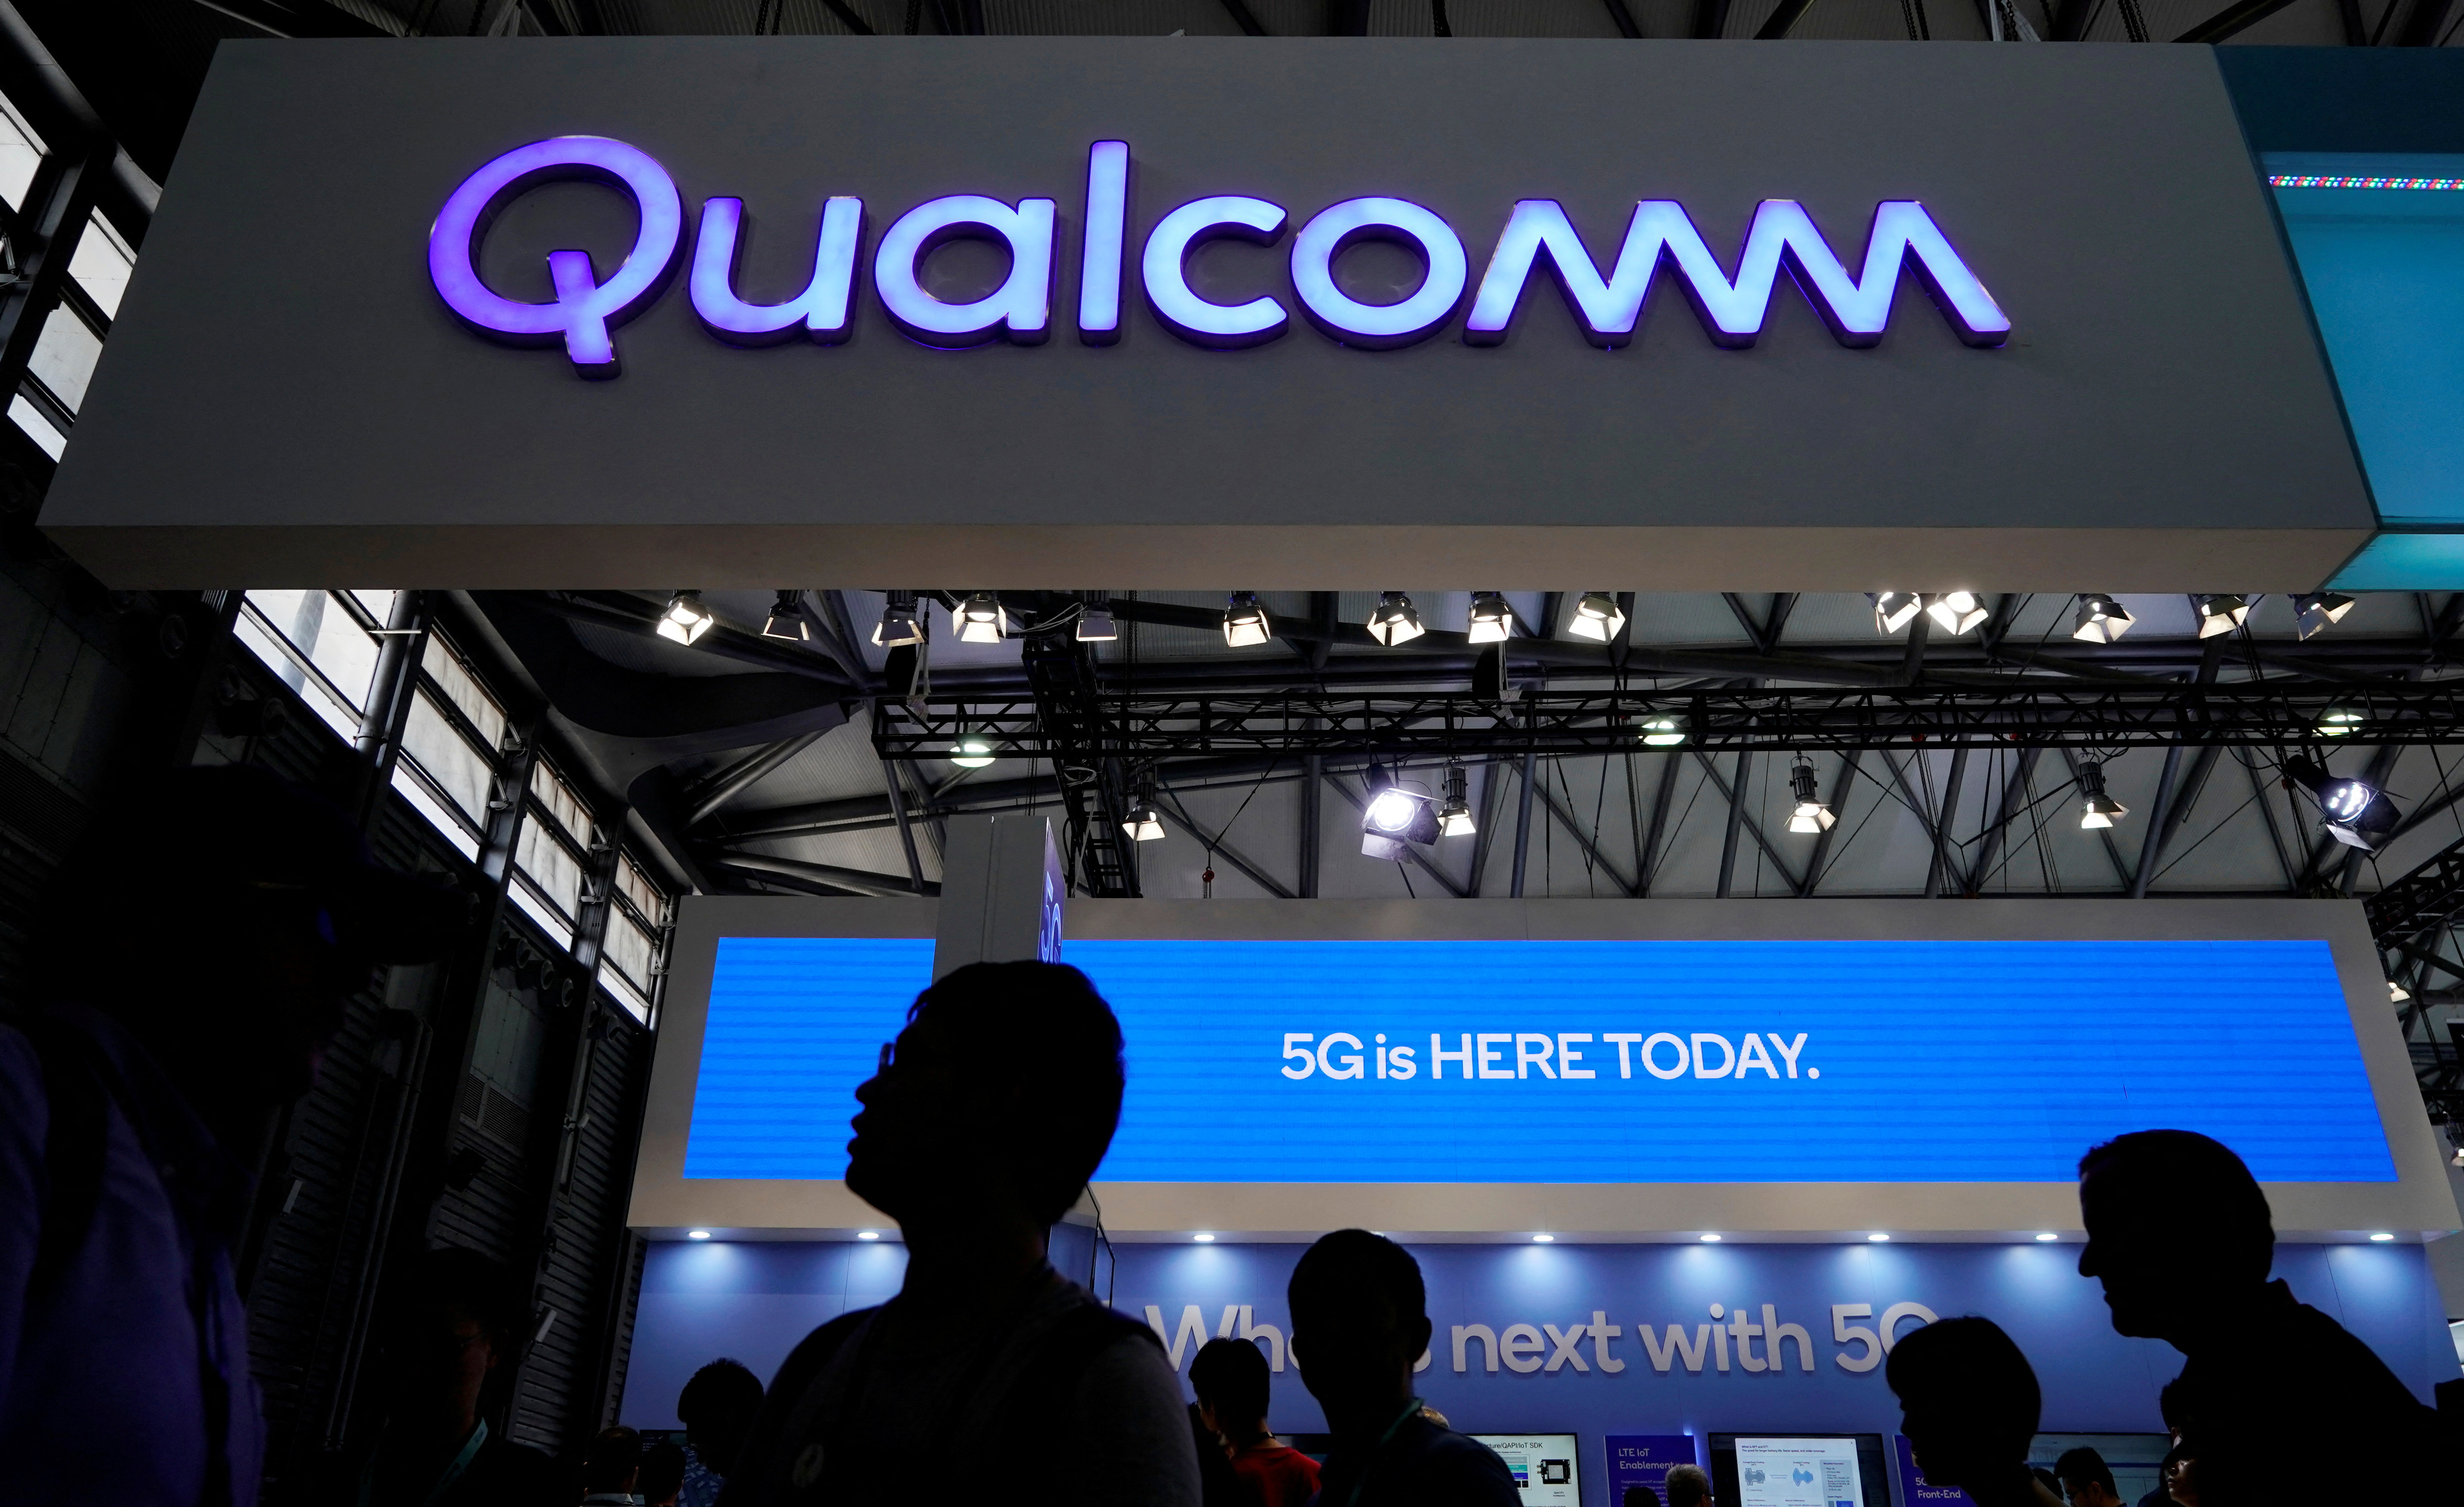 A Qualcomm sign is pictured at Mobile World Congress (MWC) in Shanghai